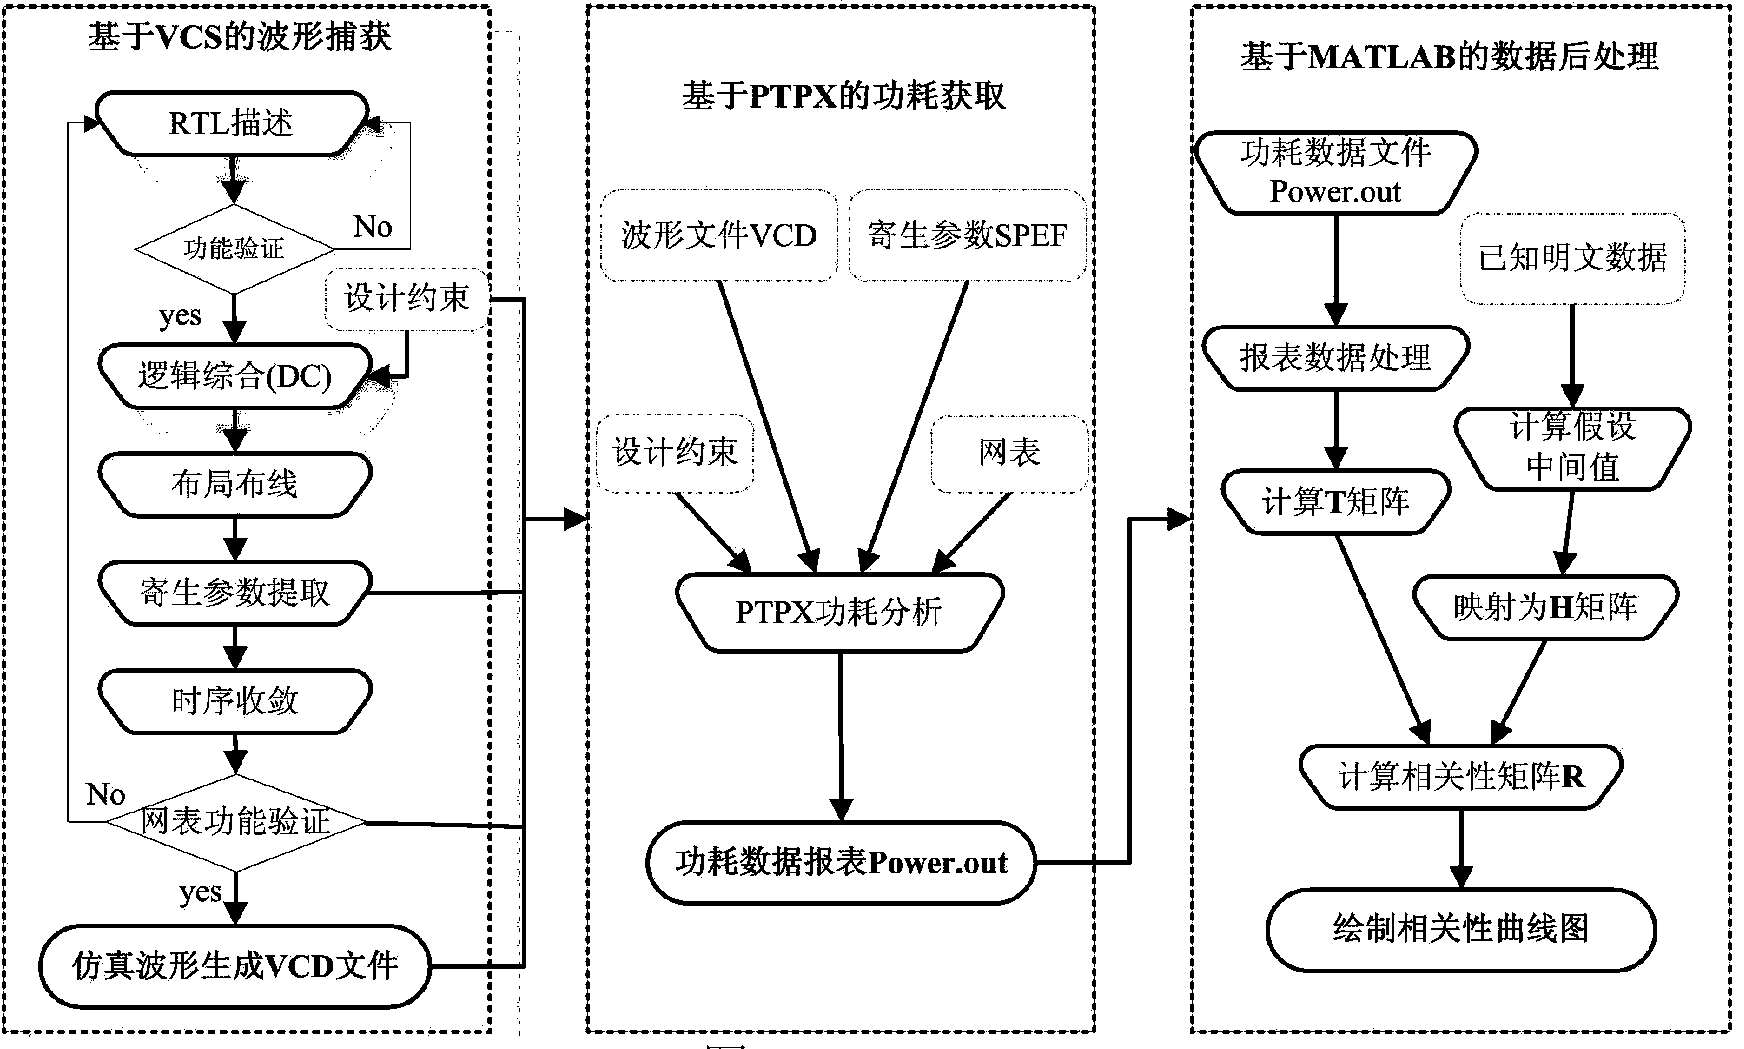 AES (advanced encryption standard) algorithm circuit oriented method for testing differential power attack